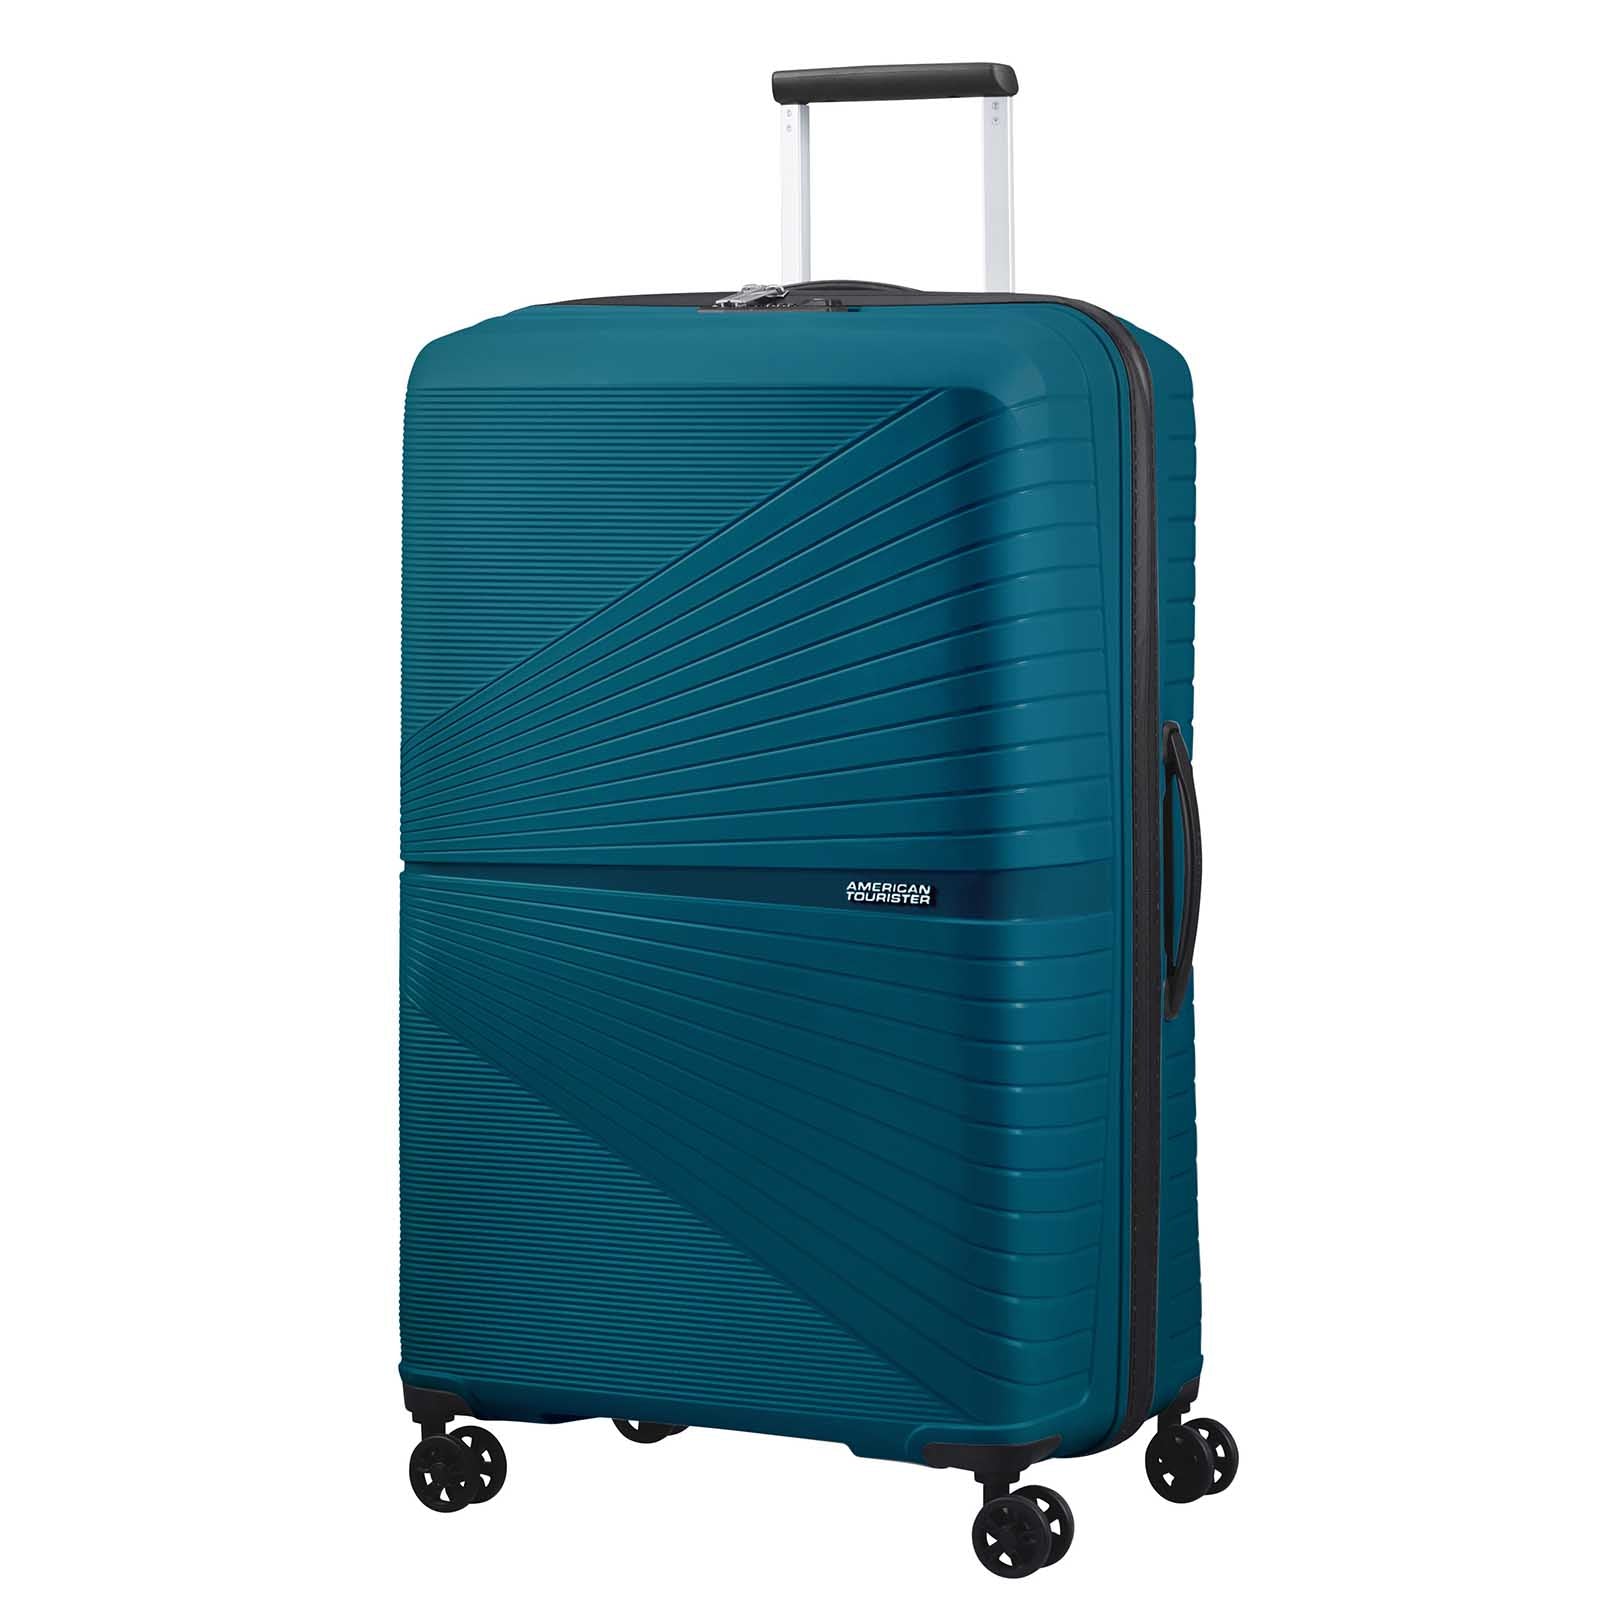 American-Tourister-Airconic-77cm-Suitcase-Deep-Ocean-Front-Angle